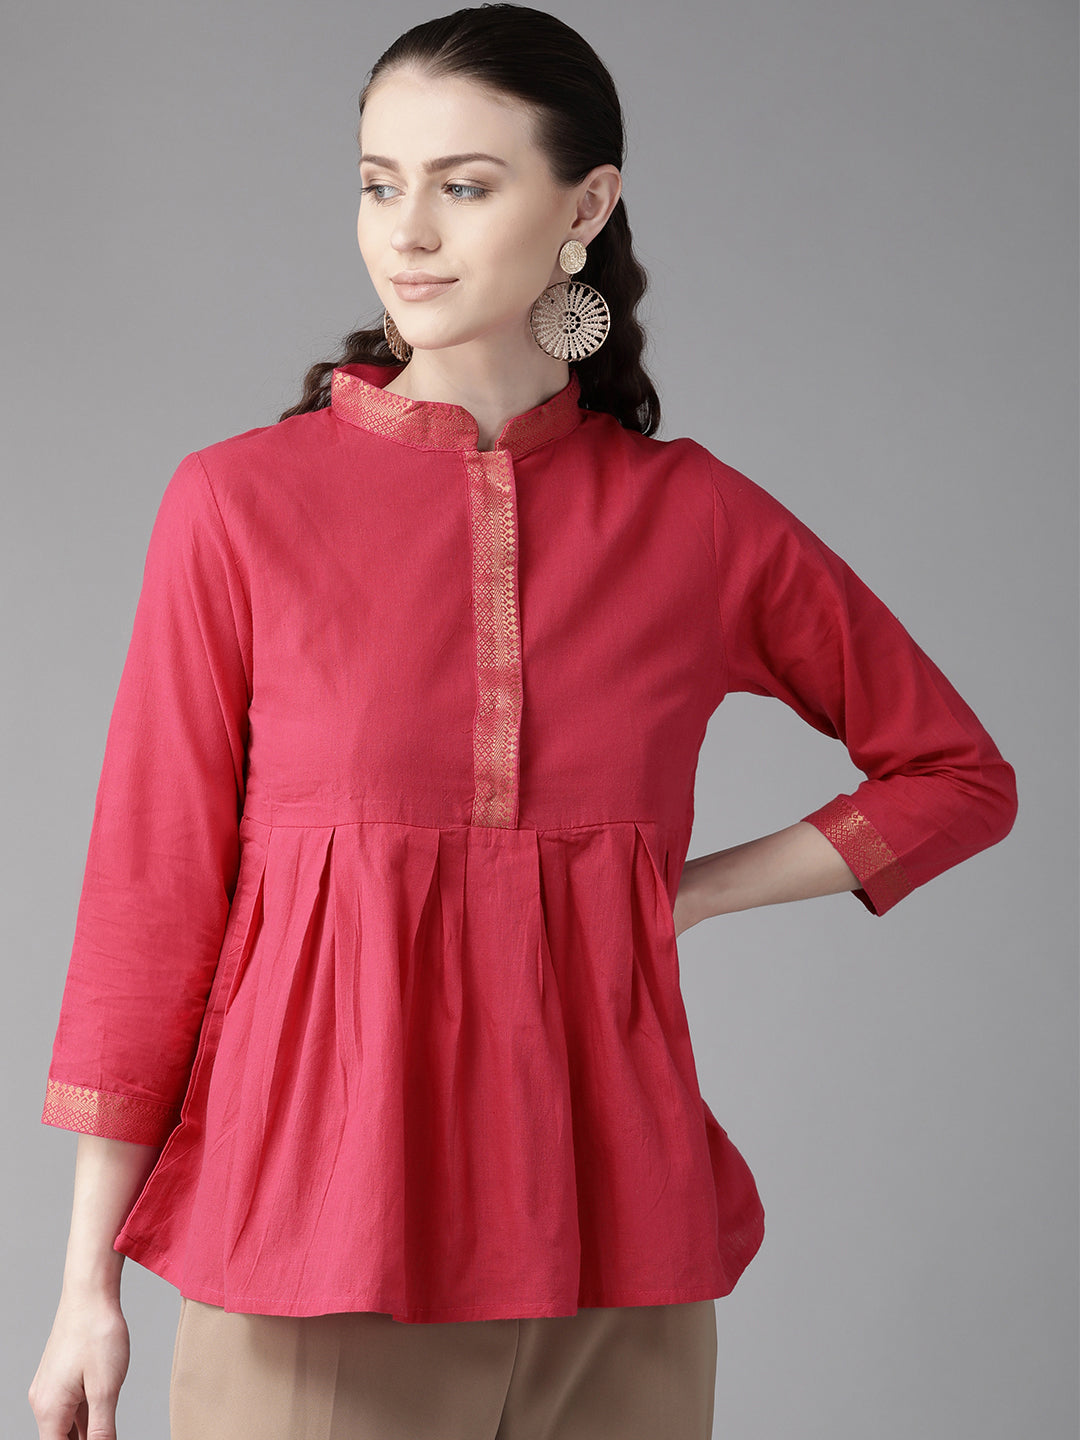 Bhama Couture Pink Solid A-Line Top